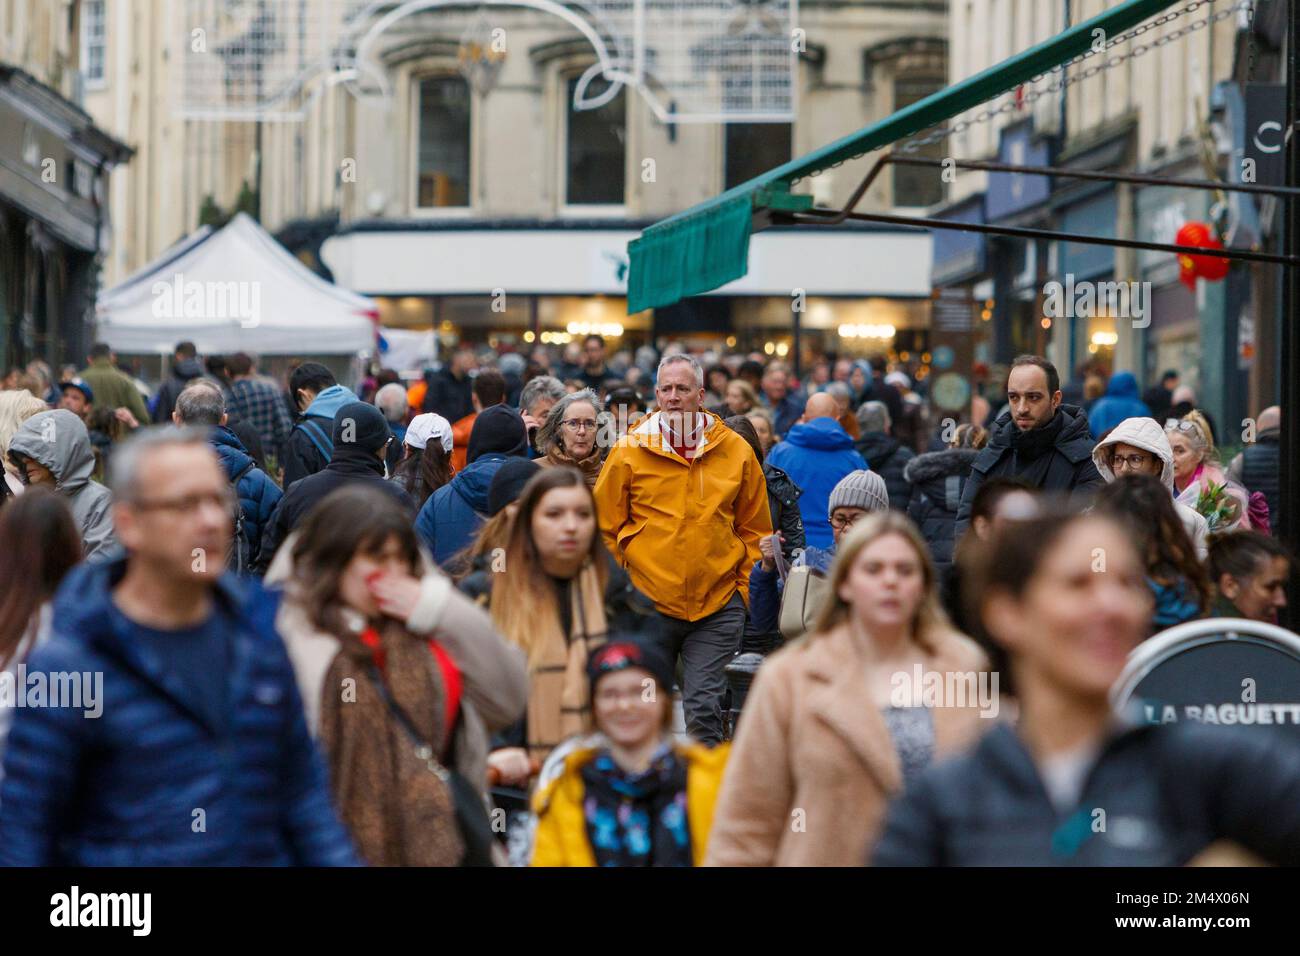 Bath, UK, 23rd Dec, 2022. With only two days left until Christmas day crowds of shoppers doing last minute shopping are pictured in Bath city centre. Many shops have tried to attract customers by starting their sales early.  Credit: Lynchpics/Alamy Live News Stock Photo